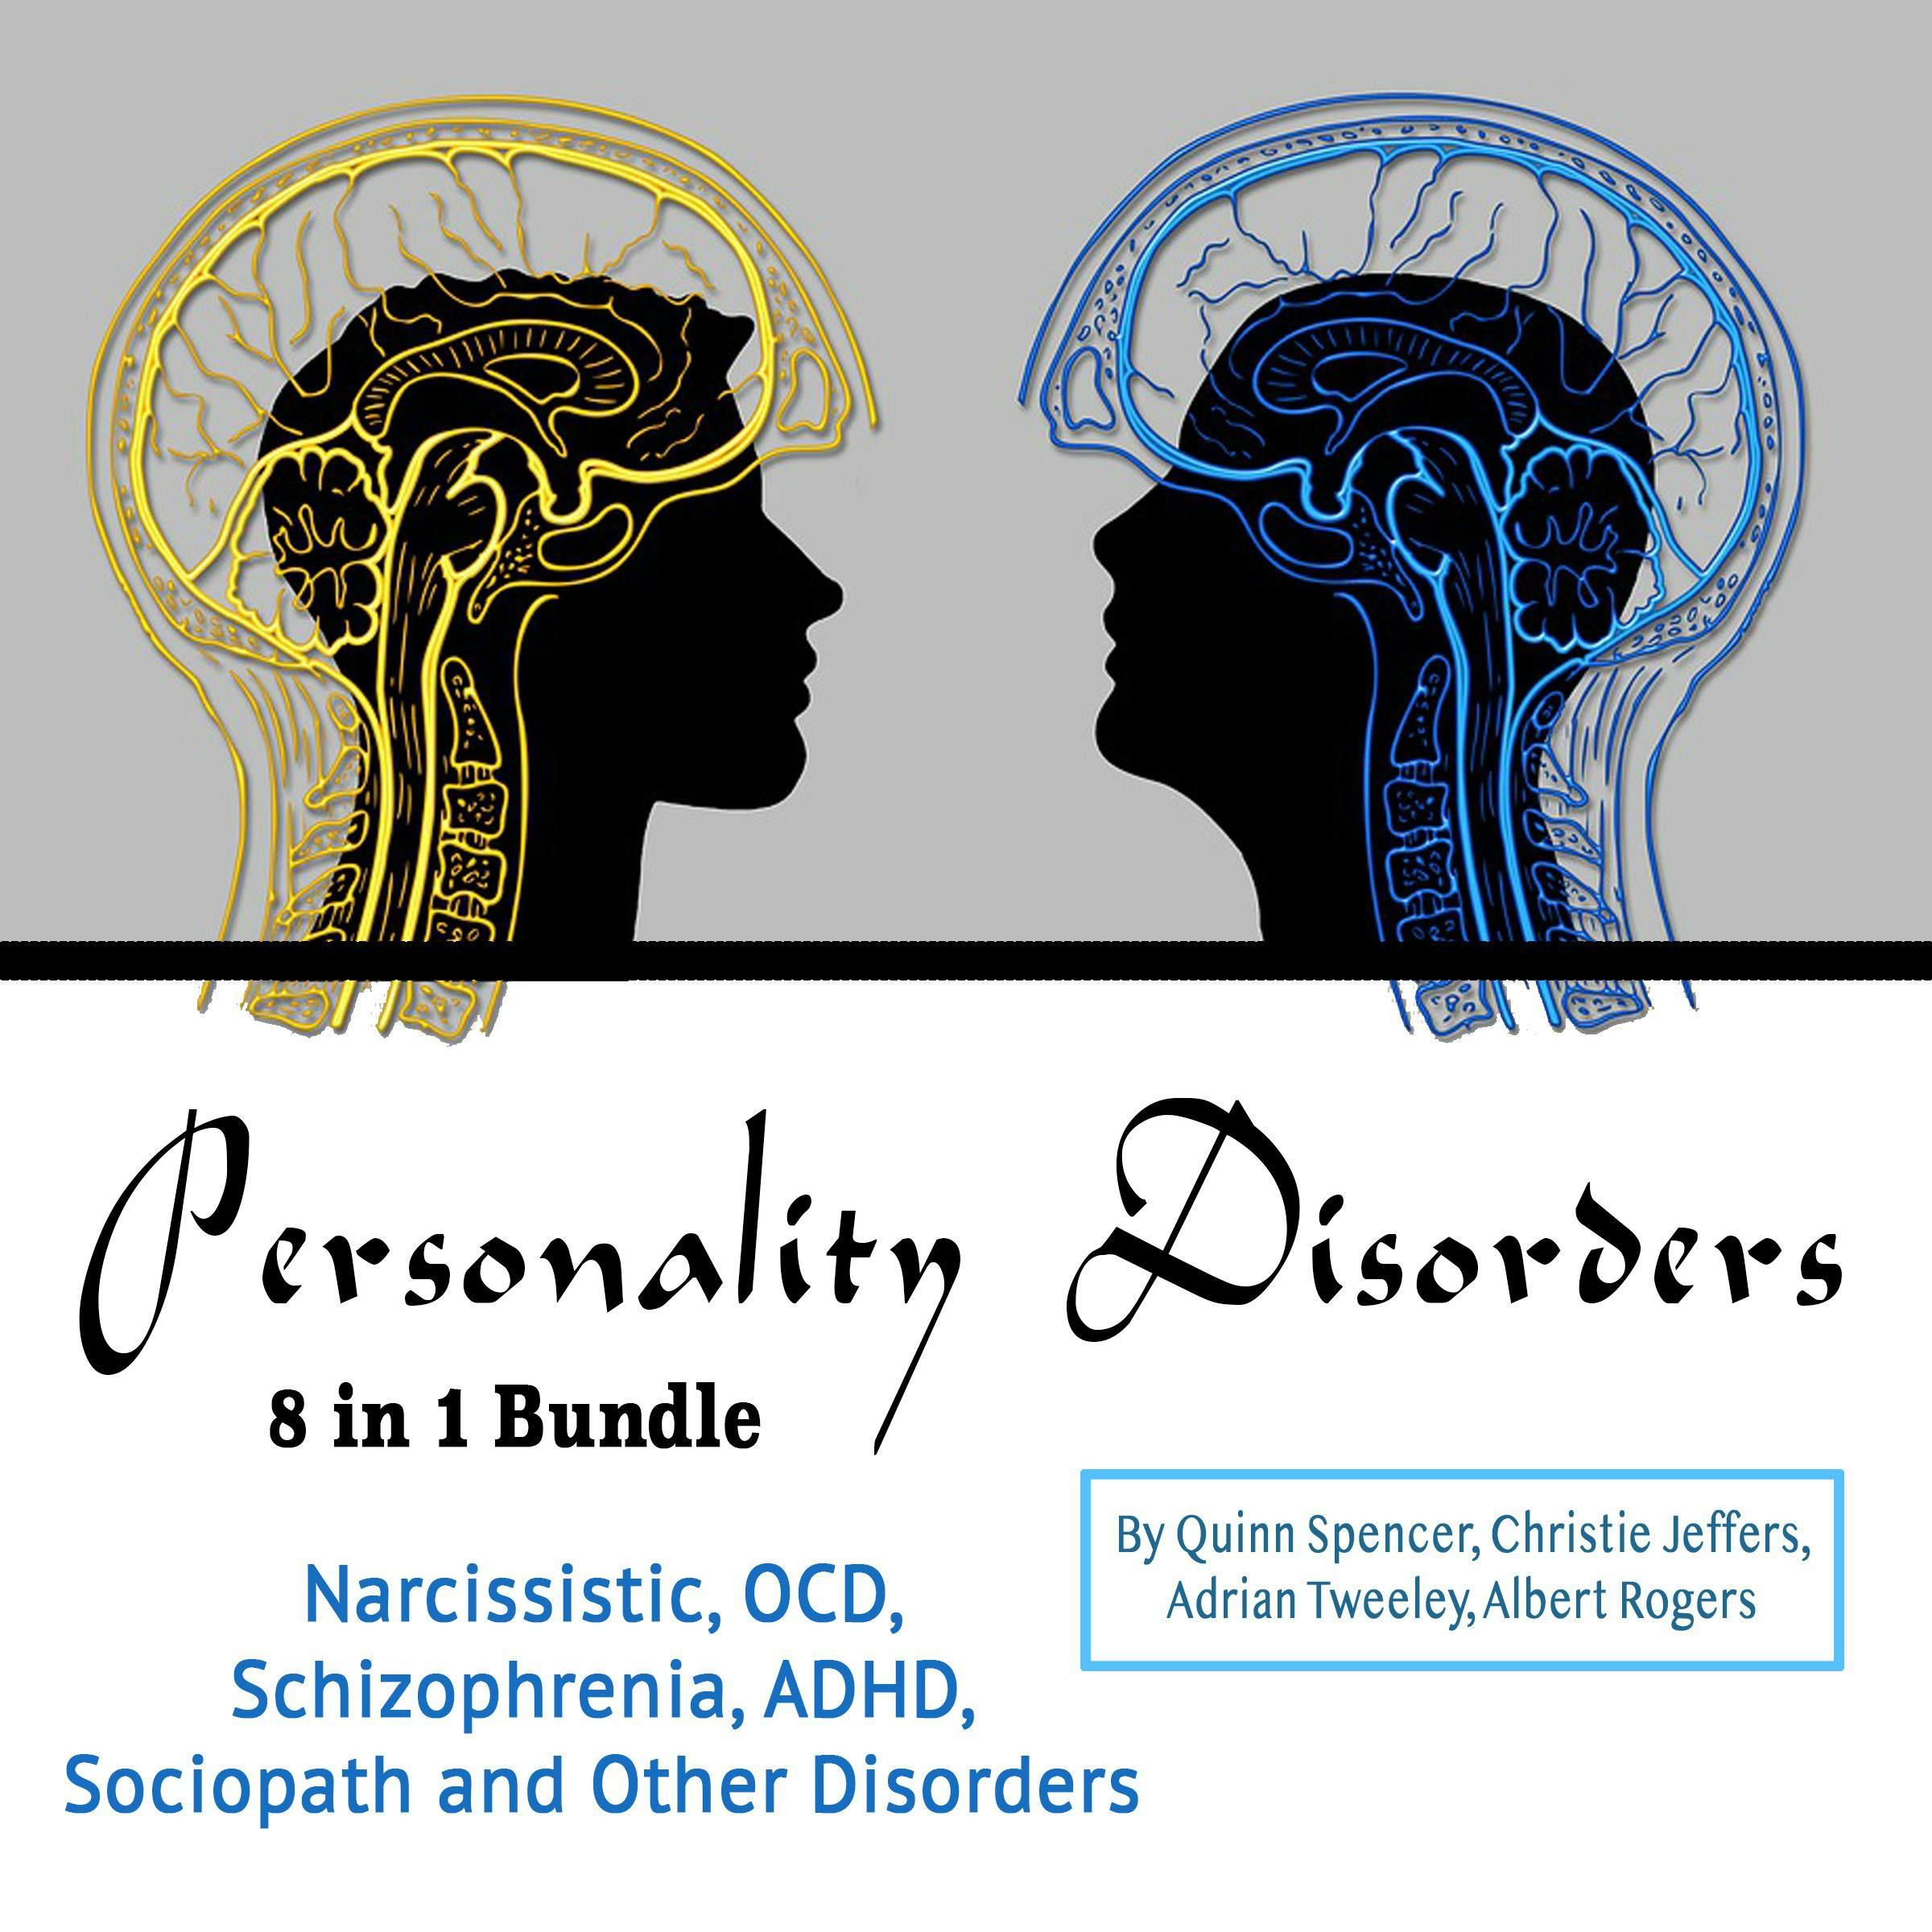 Personality Disorders: Narcissistic, OCD, Schizophrenia, ADHD, Sociopath and Other Disorders - Albert Rogers, Adrian Tweeley, Quinn Spencer, Christie Jeffers